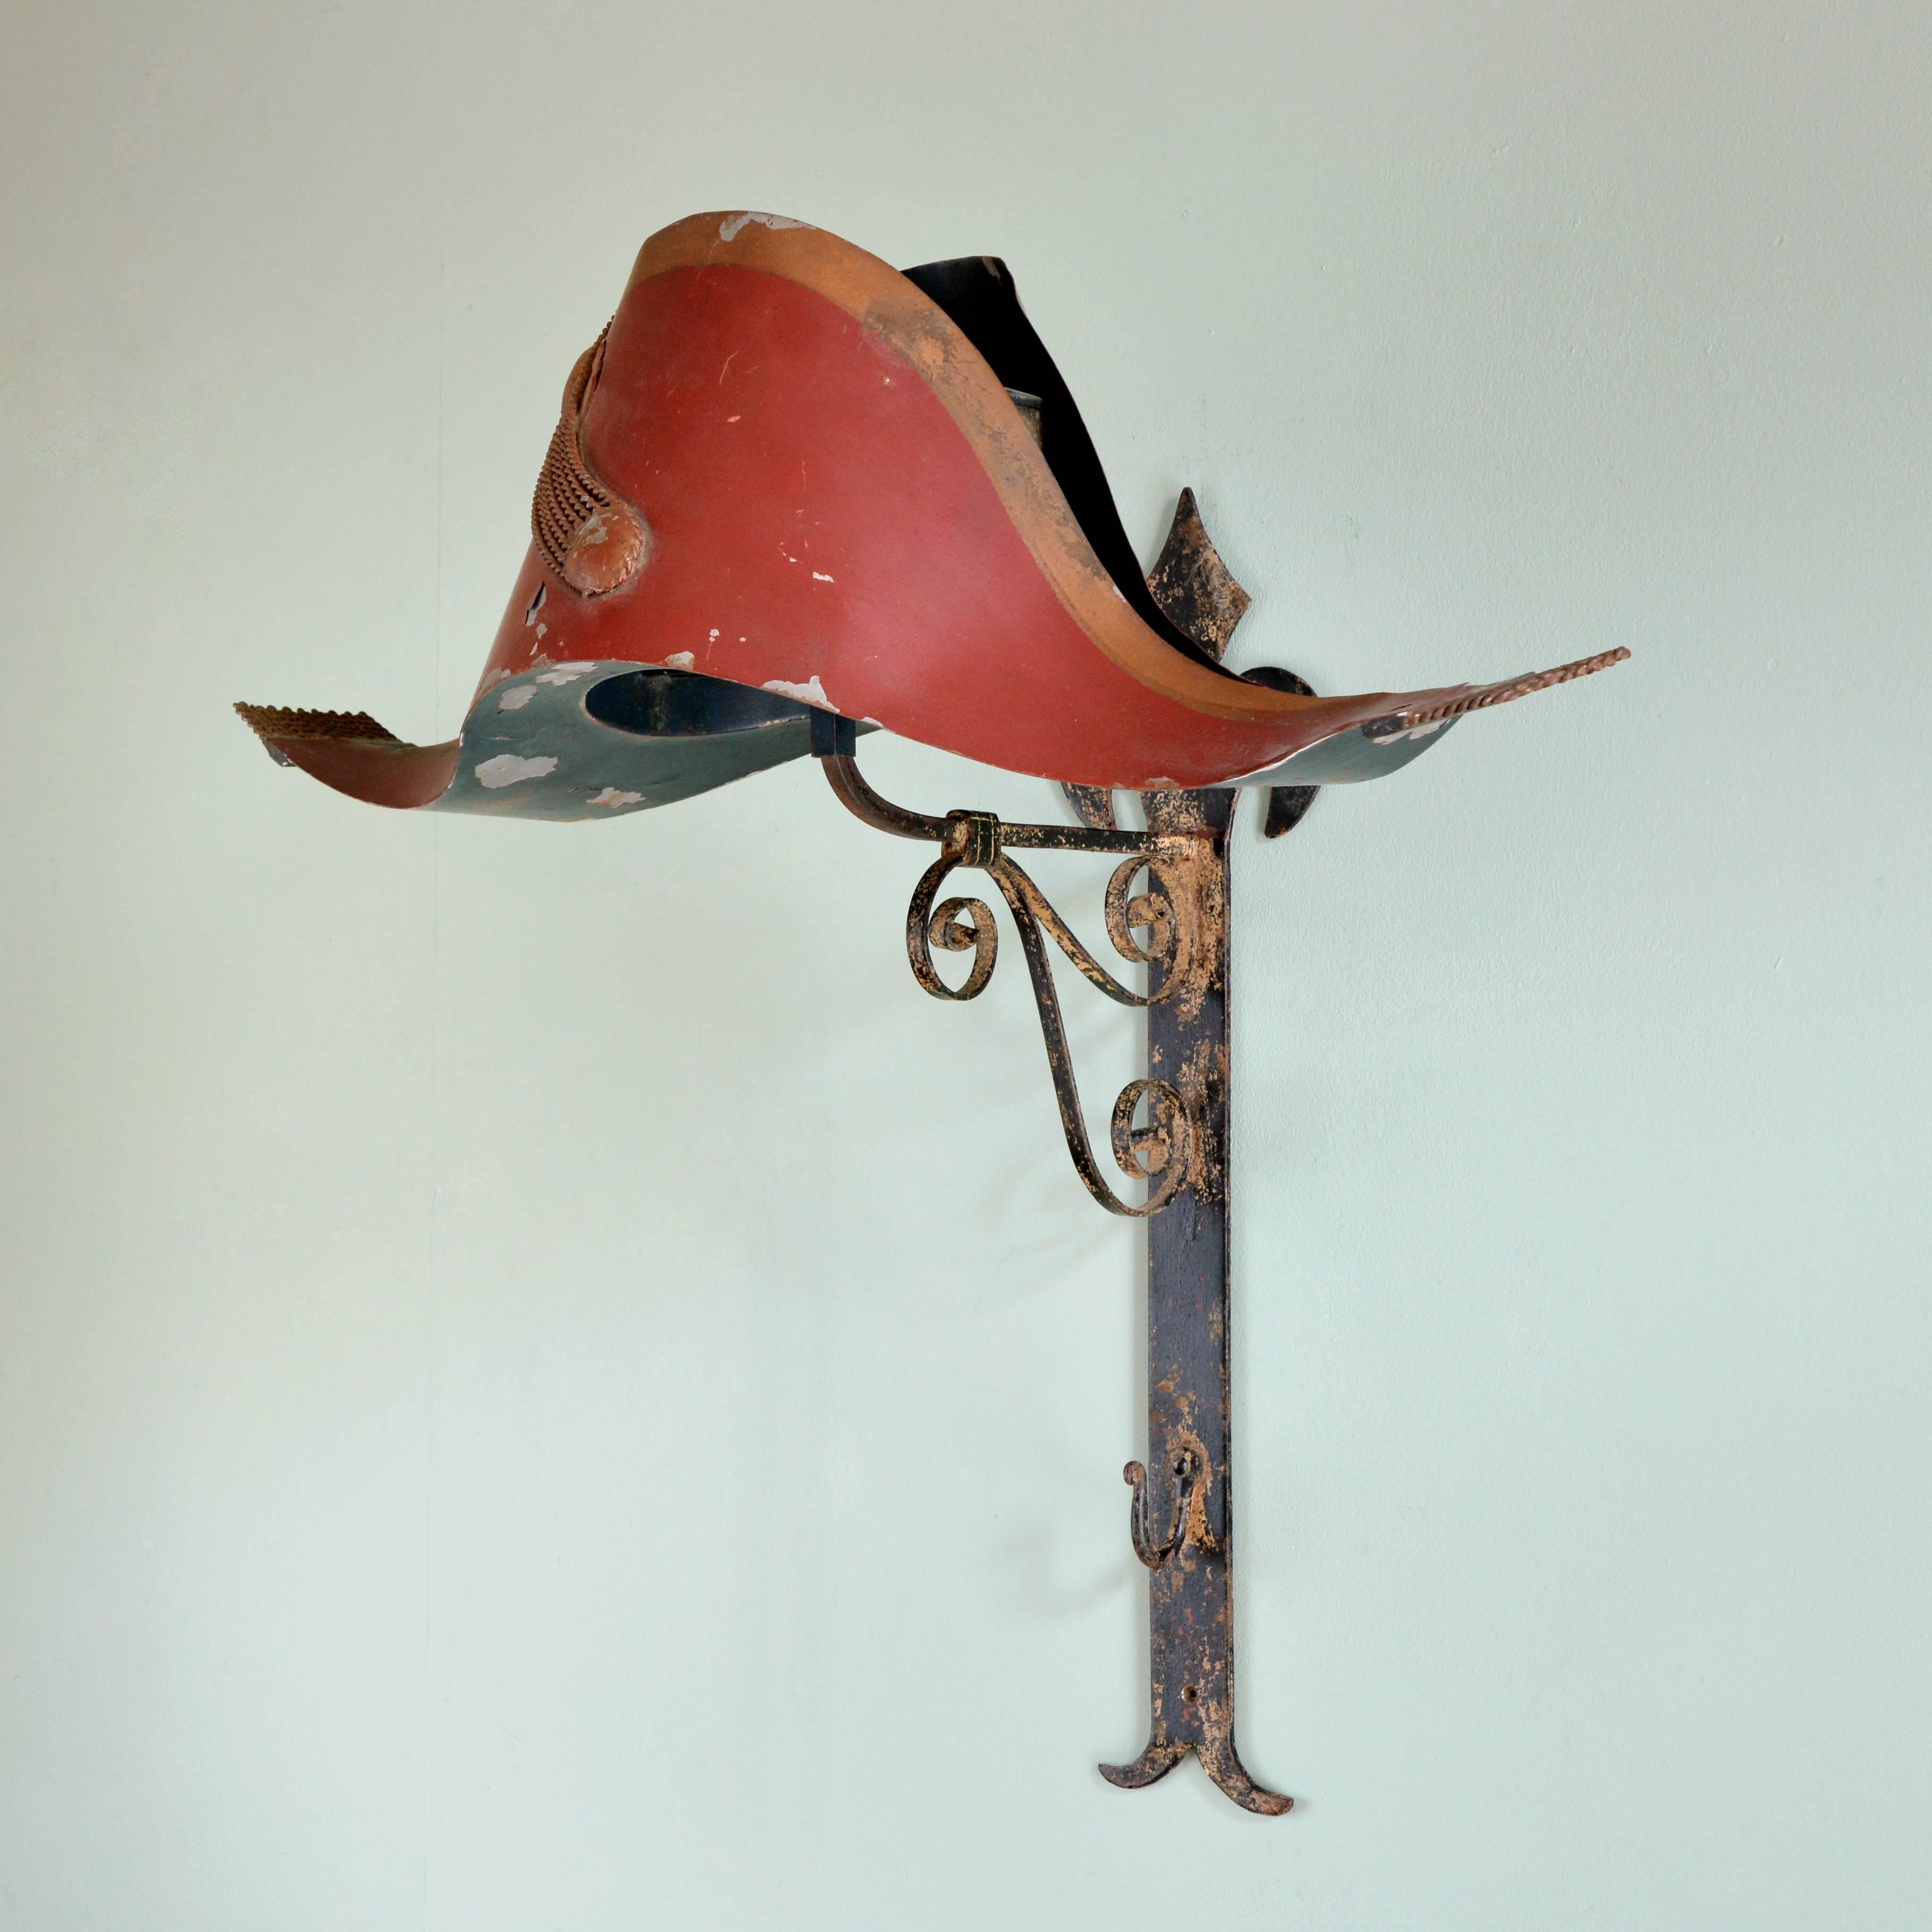 A French milliner's trade sign, first half 20th century, the eighteenth century style Bicorn hat mounted on wrought iron wall bracket.

Available to view at Brunswick House, London.

Dimensions: 61cm (24